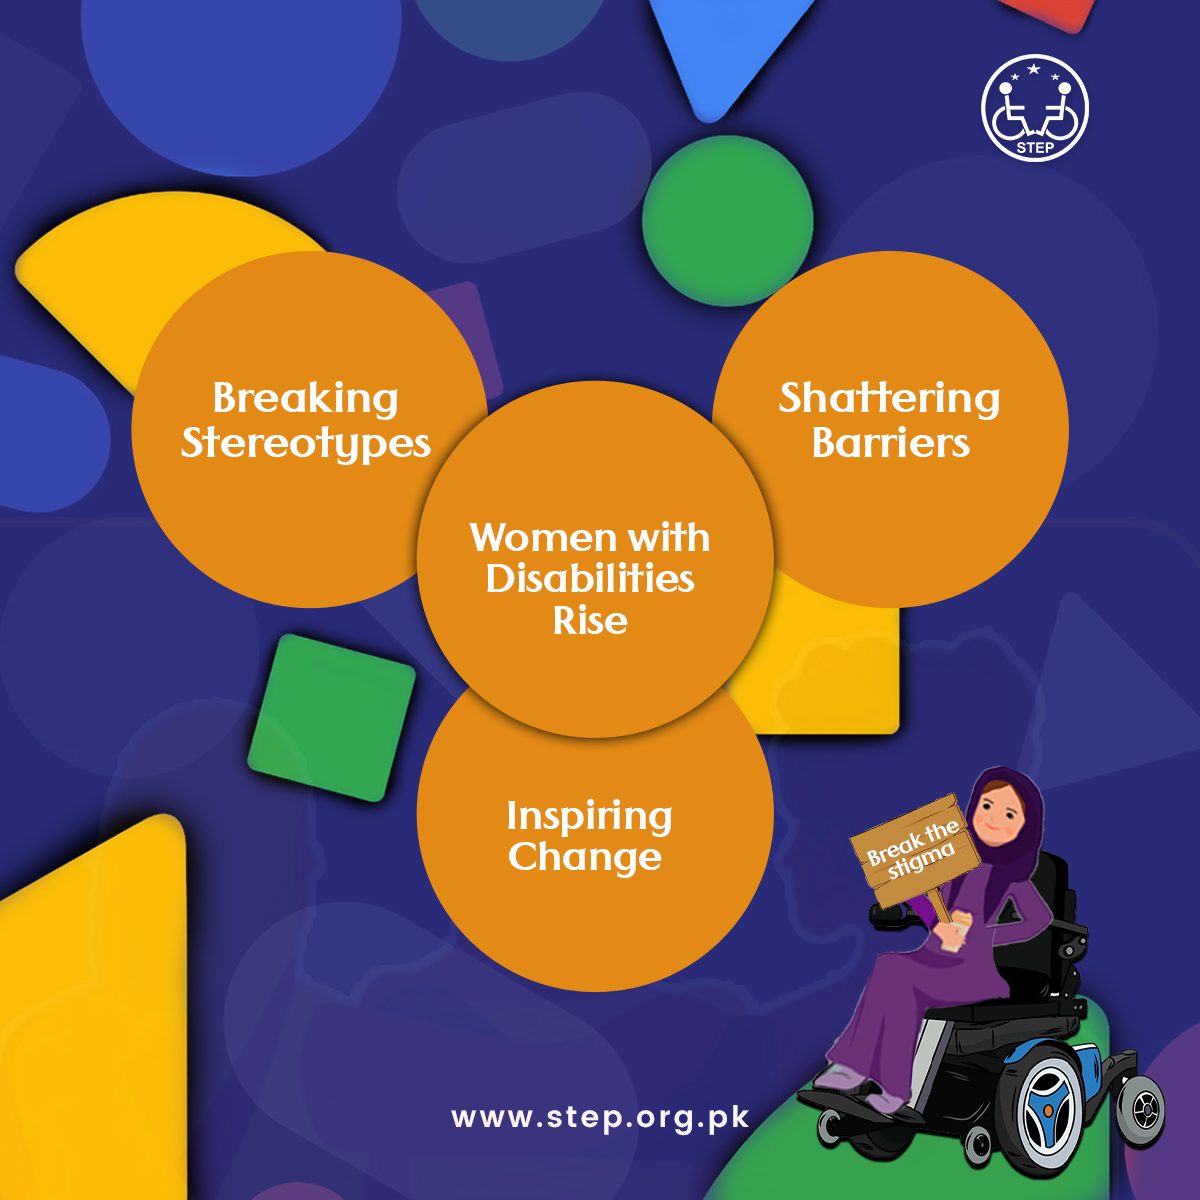 Empowered, Resilient, Unstoppable: Women with Disabilities Rise. It's time to break the stereotypes. It's time to break the stigma. It's time to rise. It's time for change

#STEP #STEPPakistan #Disabilityrights #Womenwithdisabilities #Endgenderbasedviolence #LeavingNoOneBehind